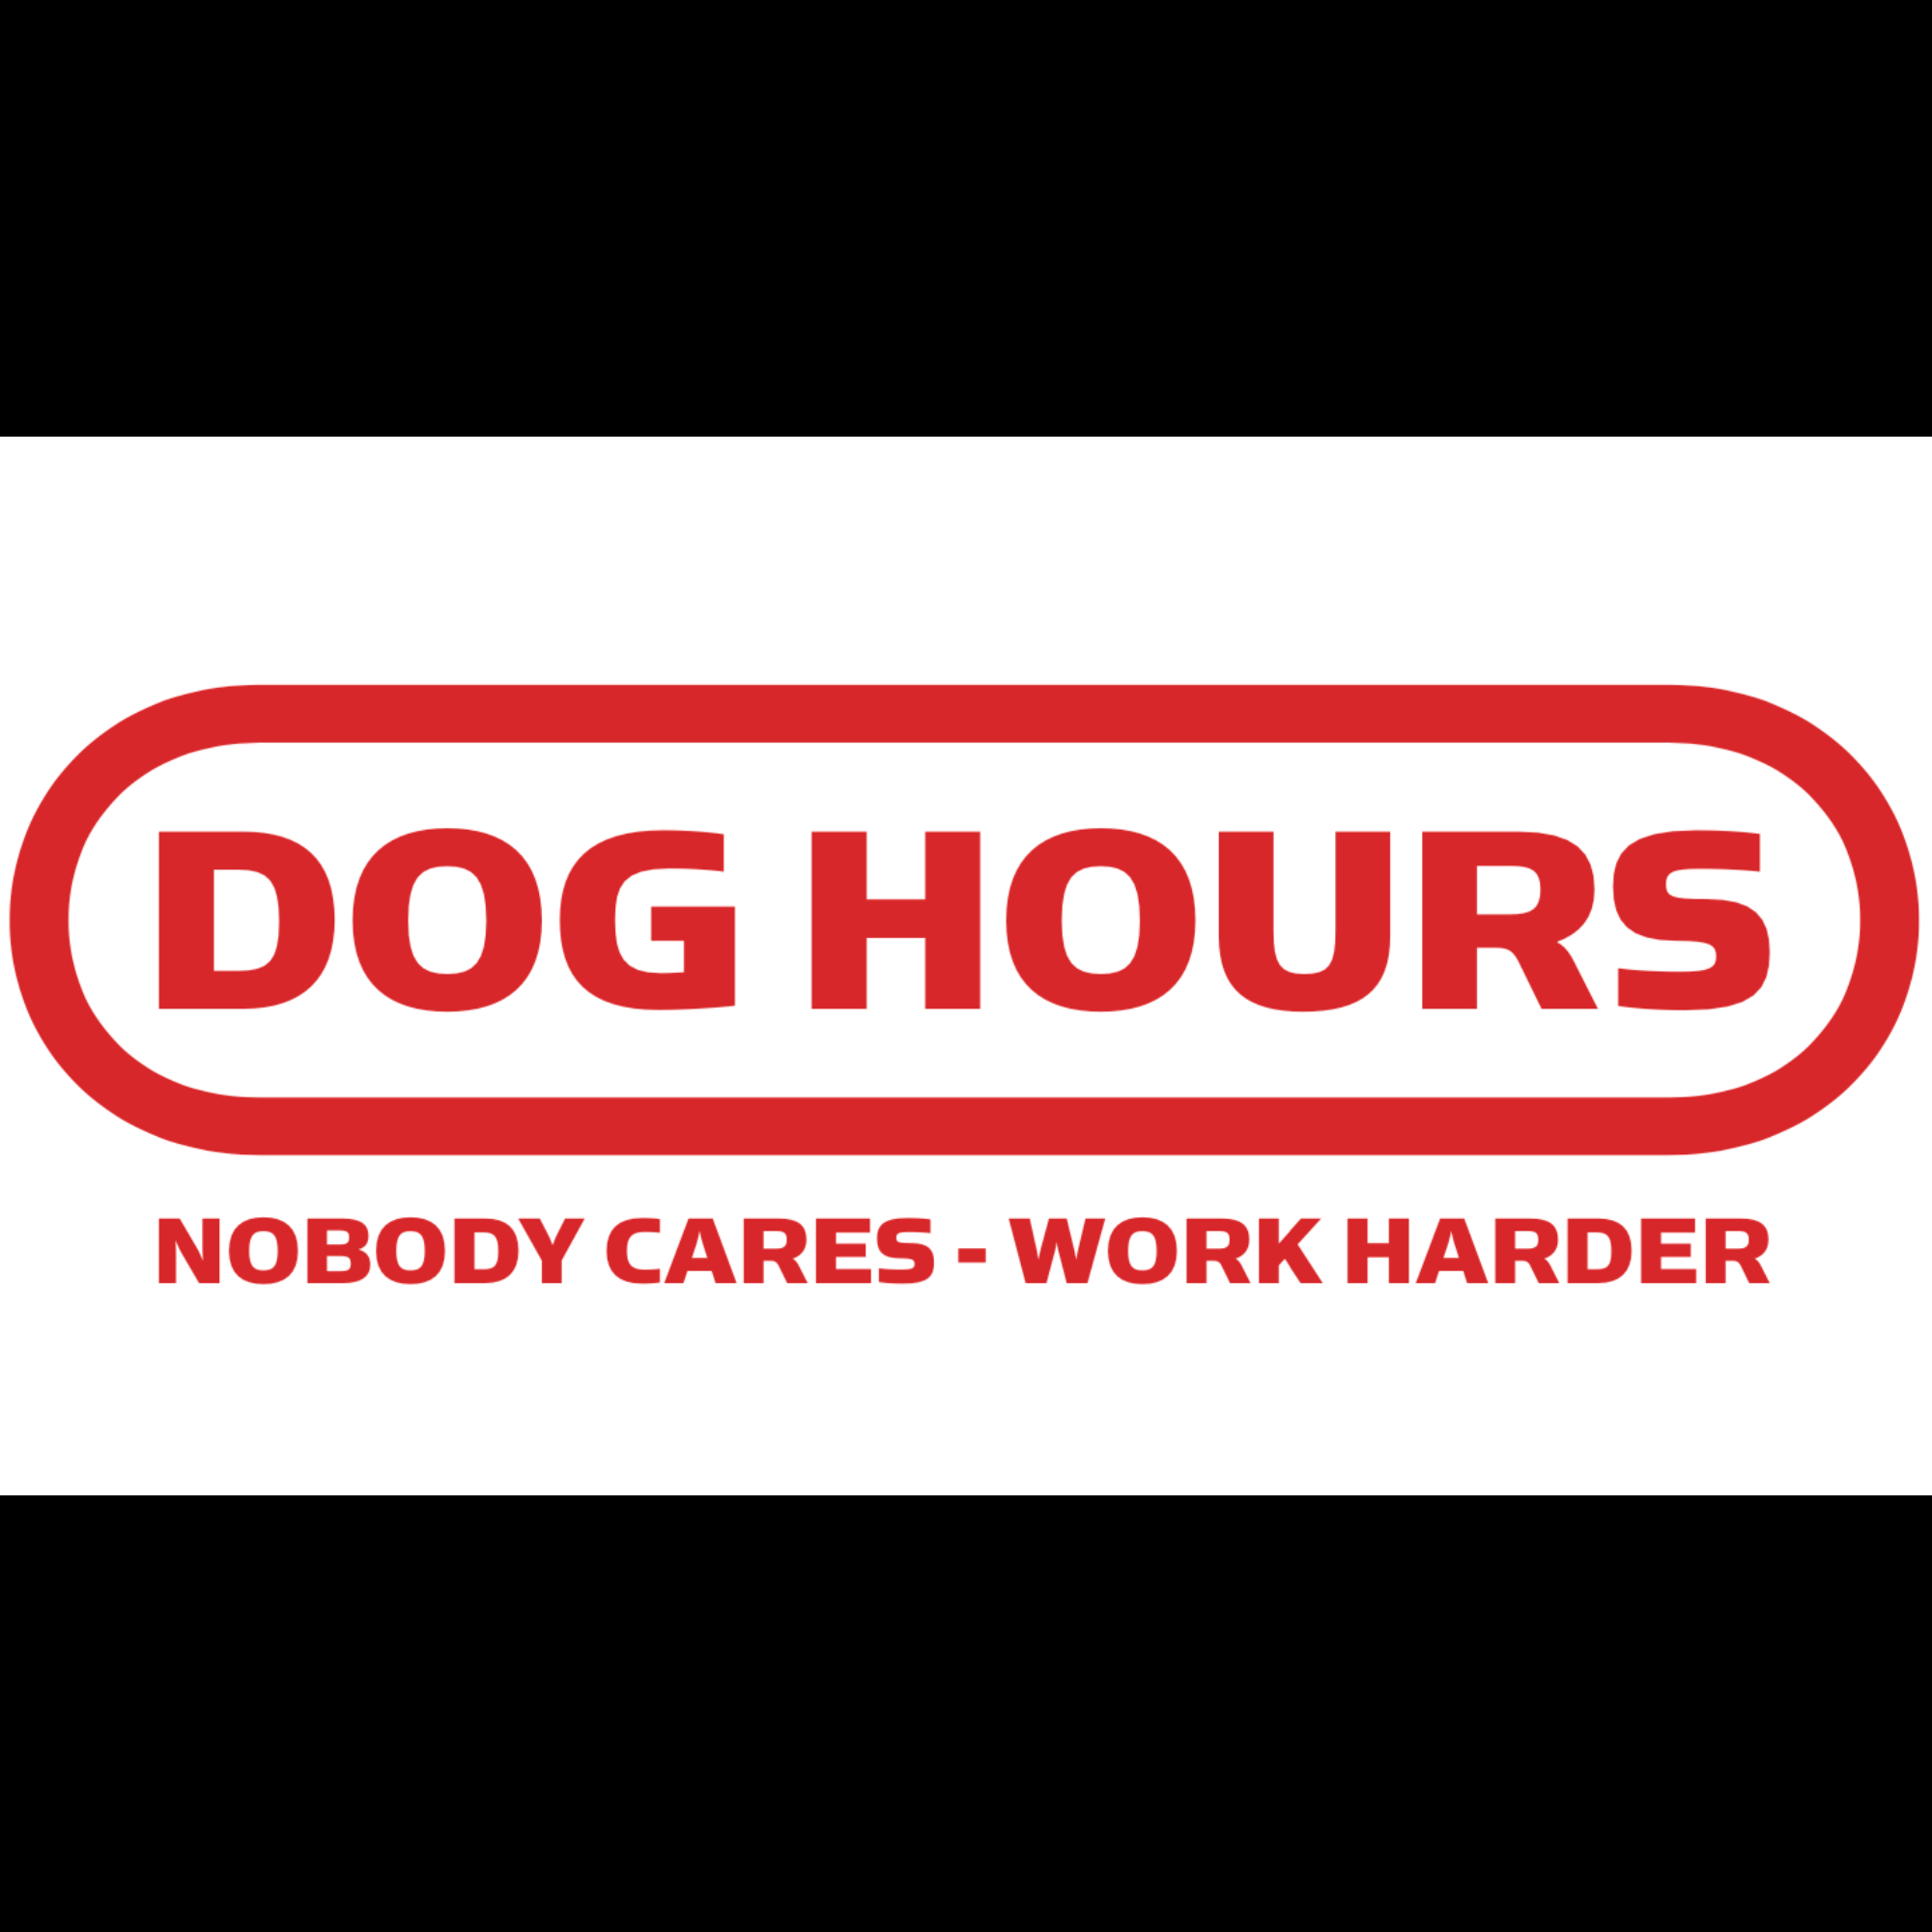 The official logo of DOGHOURS